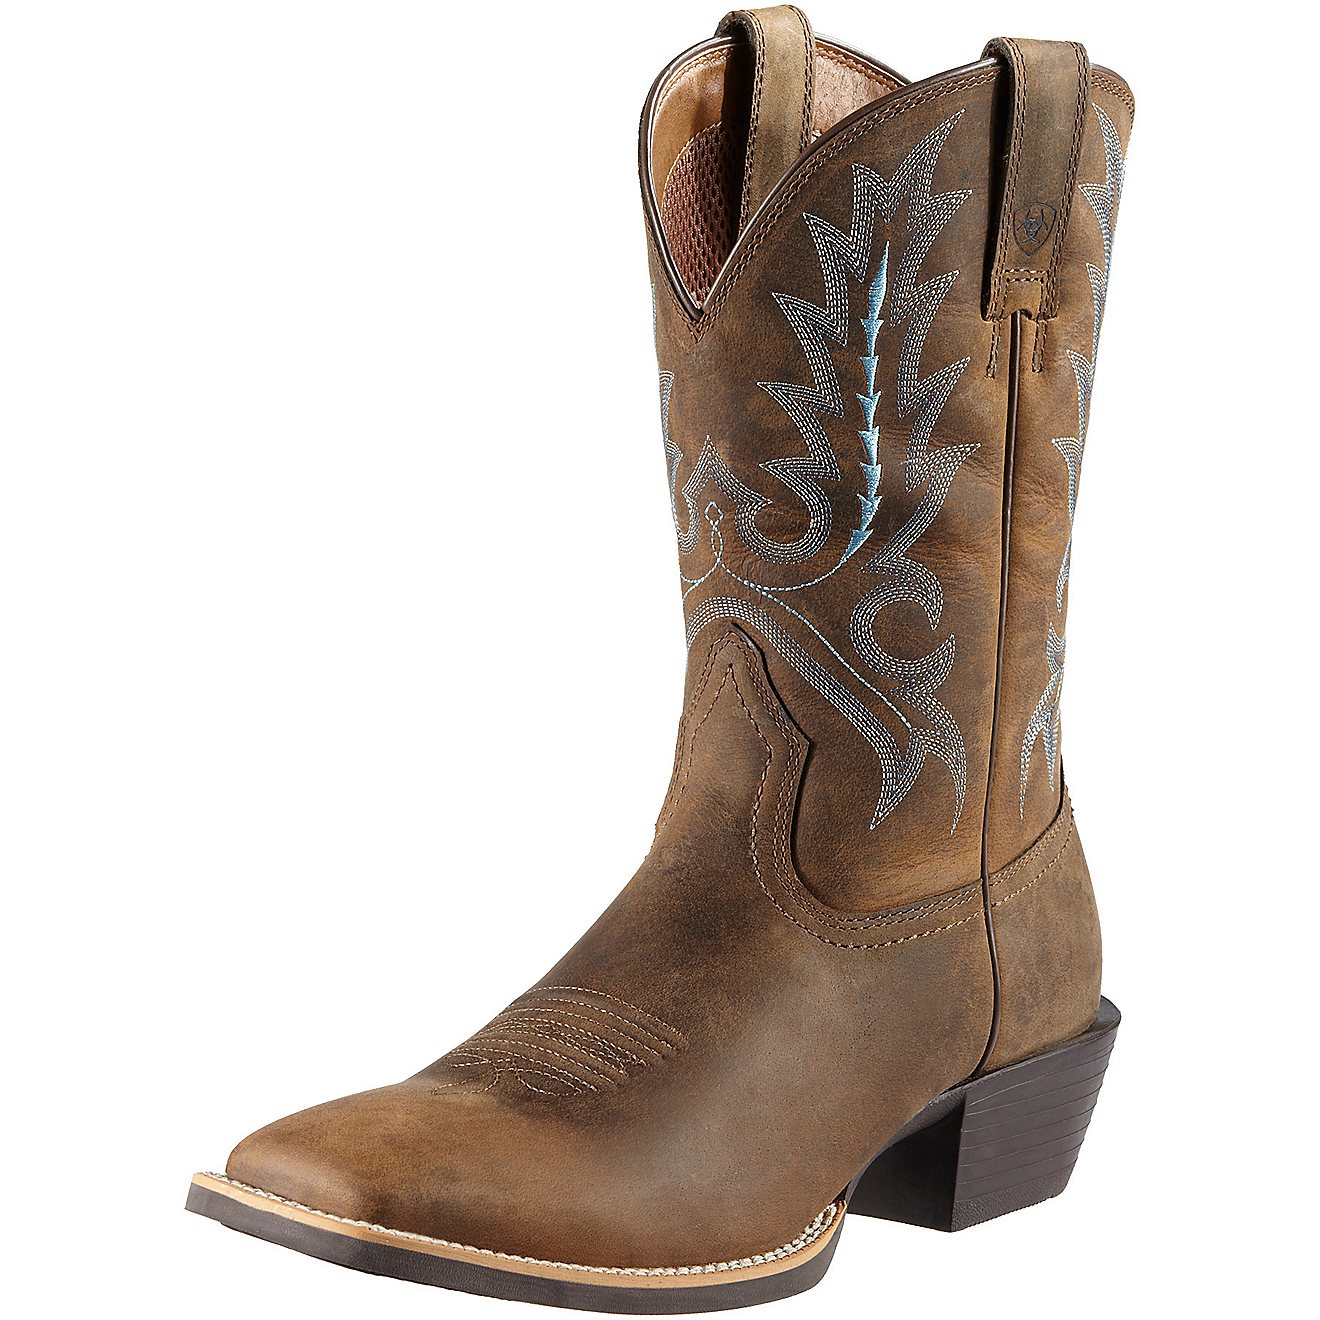 Ariat Men's Sport Outfitter Western Boots                                                                                        - view number 2